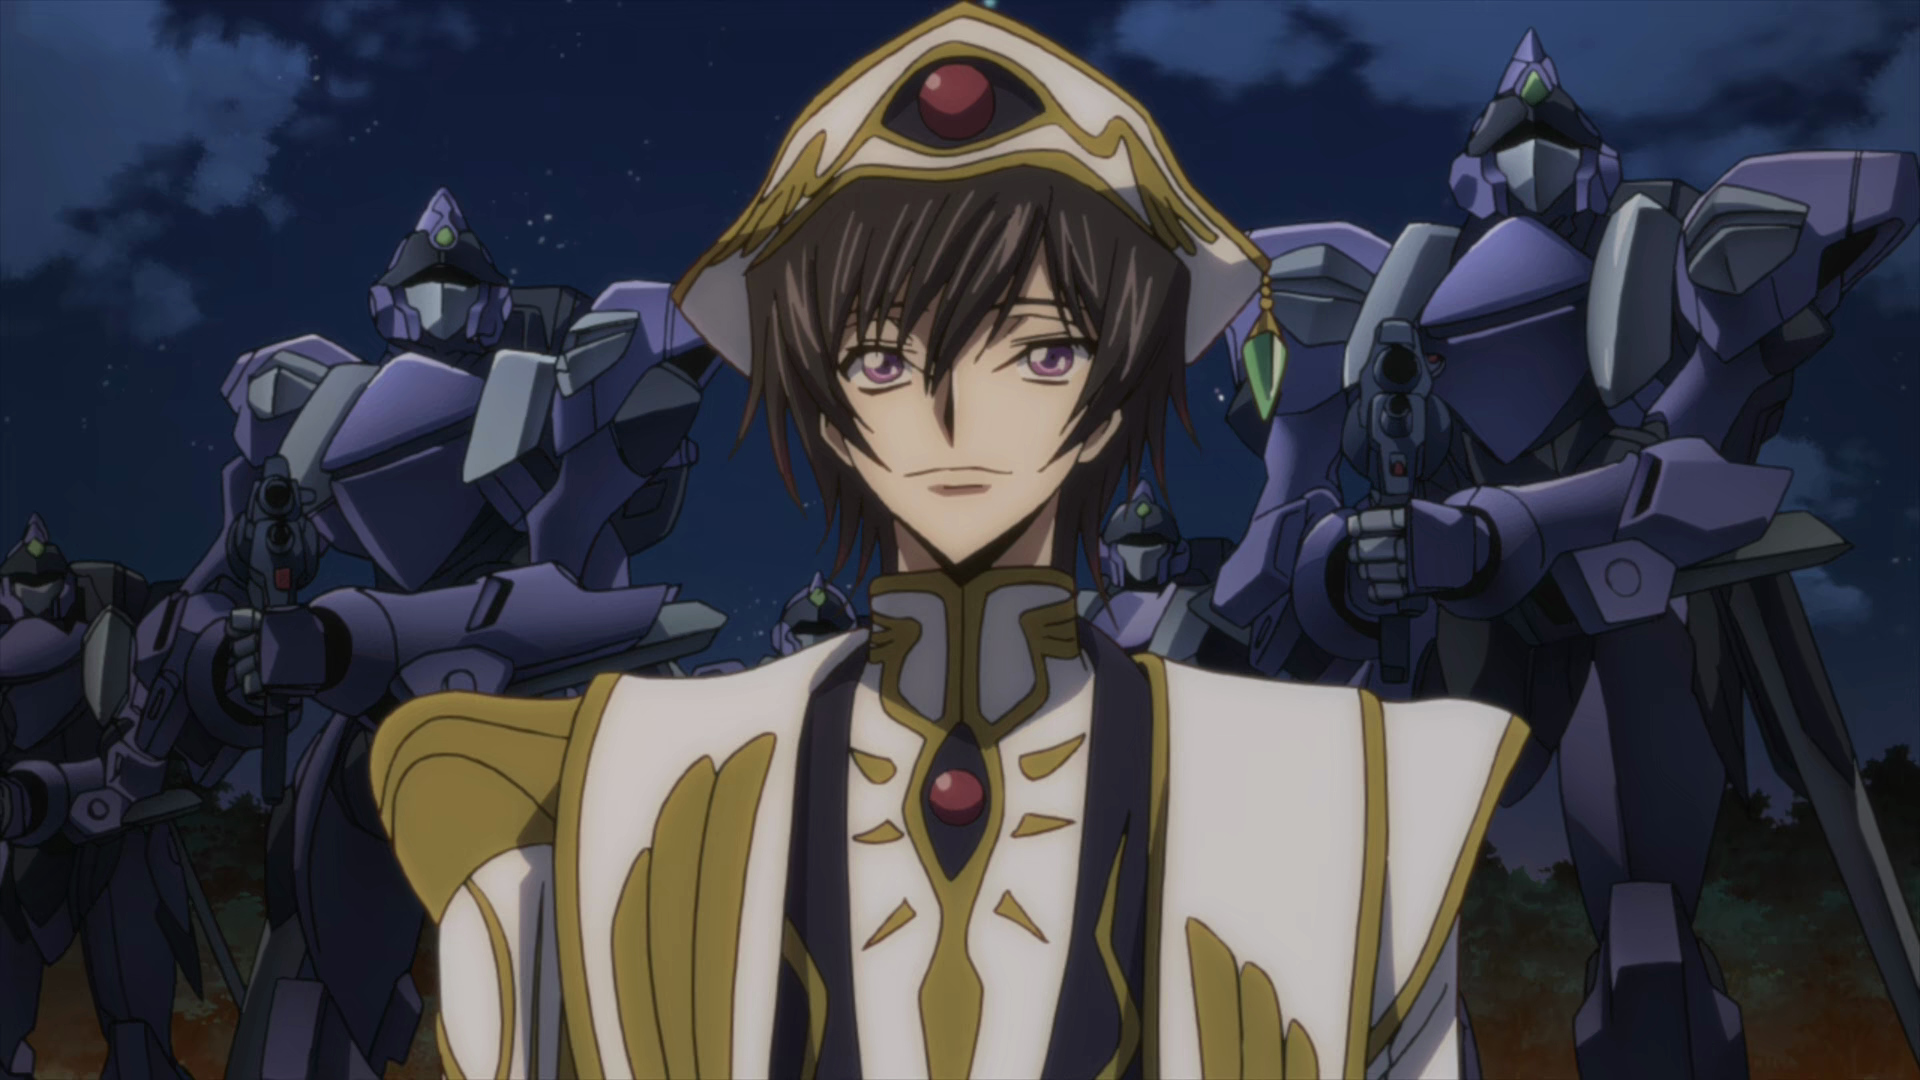 Free Download Code Geass Episode English Dubbed On Youtube - everastro